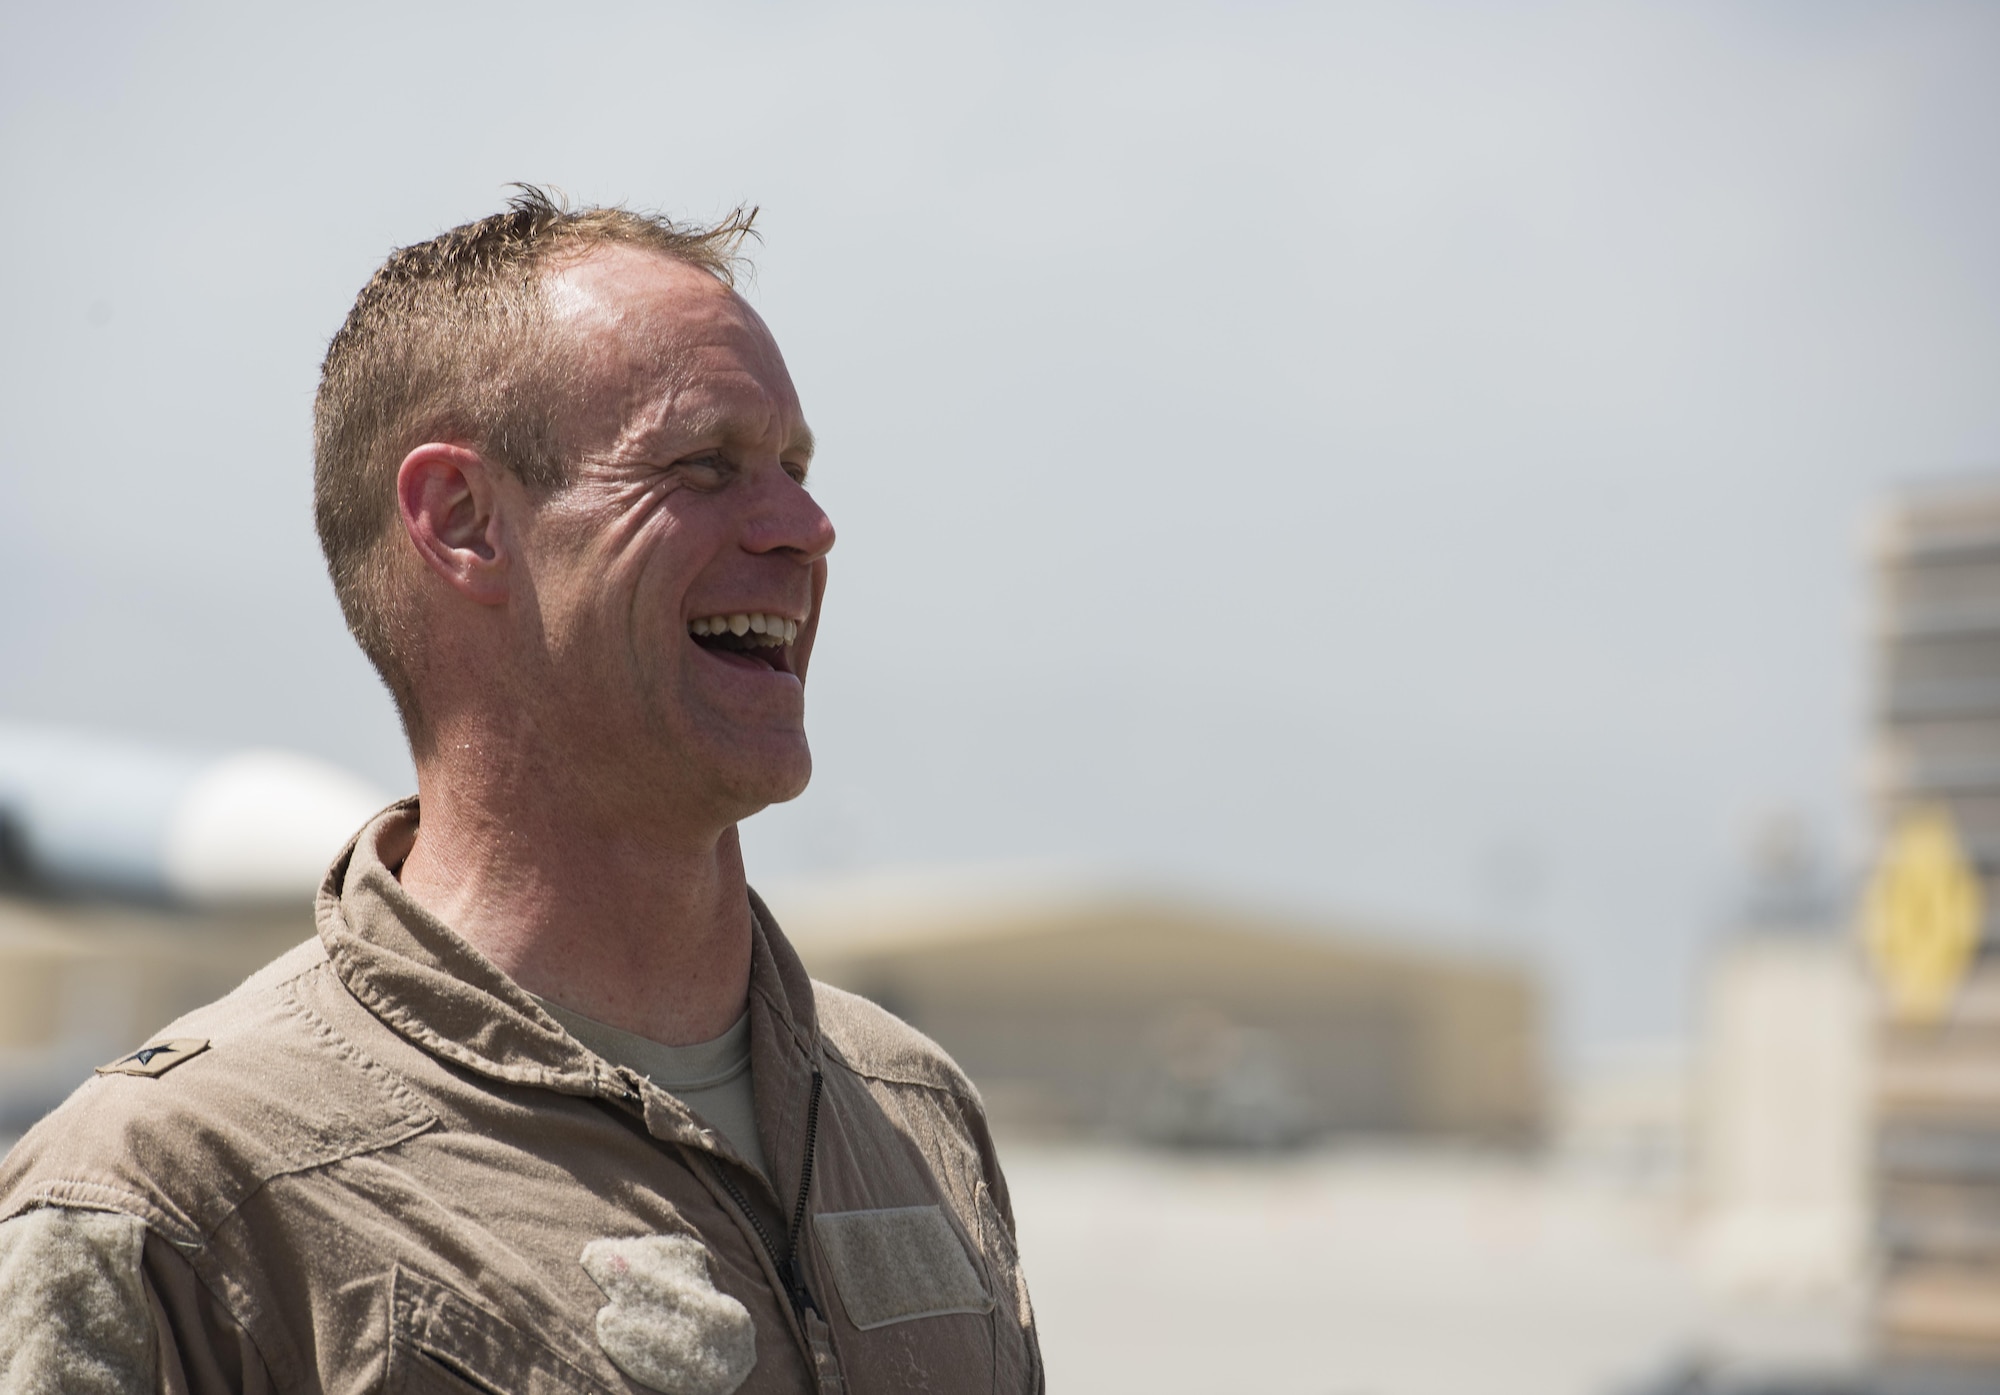 Brig. Gen. Jim Sears, commander of the 455th Air Expeditionary Wing, conducted his fini flight out of Bagram Airfield, Afghanistan, May 22, 2017. During the flight, Sears patrolled the skies with his wingman, engaging enemy ground forces from above to support coalition and Afghan troops. Sears is a decorated pilot, flying in the C-130E Hercules, T-3A Firefly, T-38C Talon and F-16 Fighting Falcon. (U.S. Air Force photo by Staff Sgt. Benjamin Gonsier)